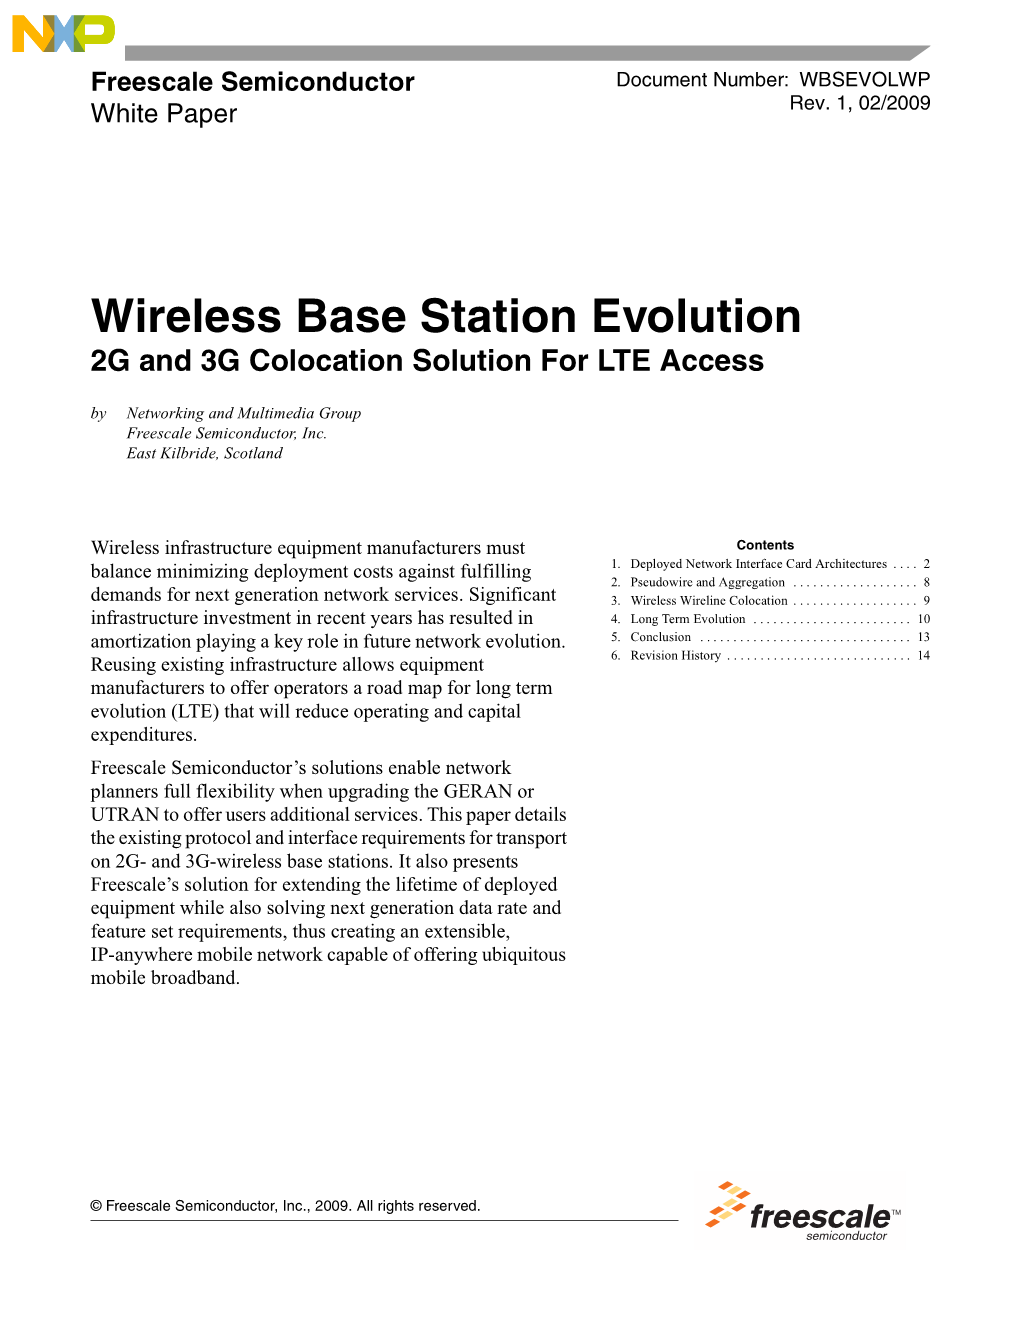 Wireless Base Station Evolution 2G and 3G Colocation Solution for LTE Access by Networking and Multimedia Group Freescale Semiconductor, Inc